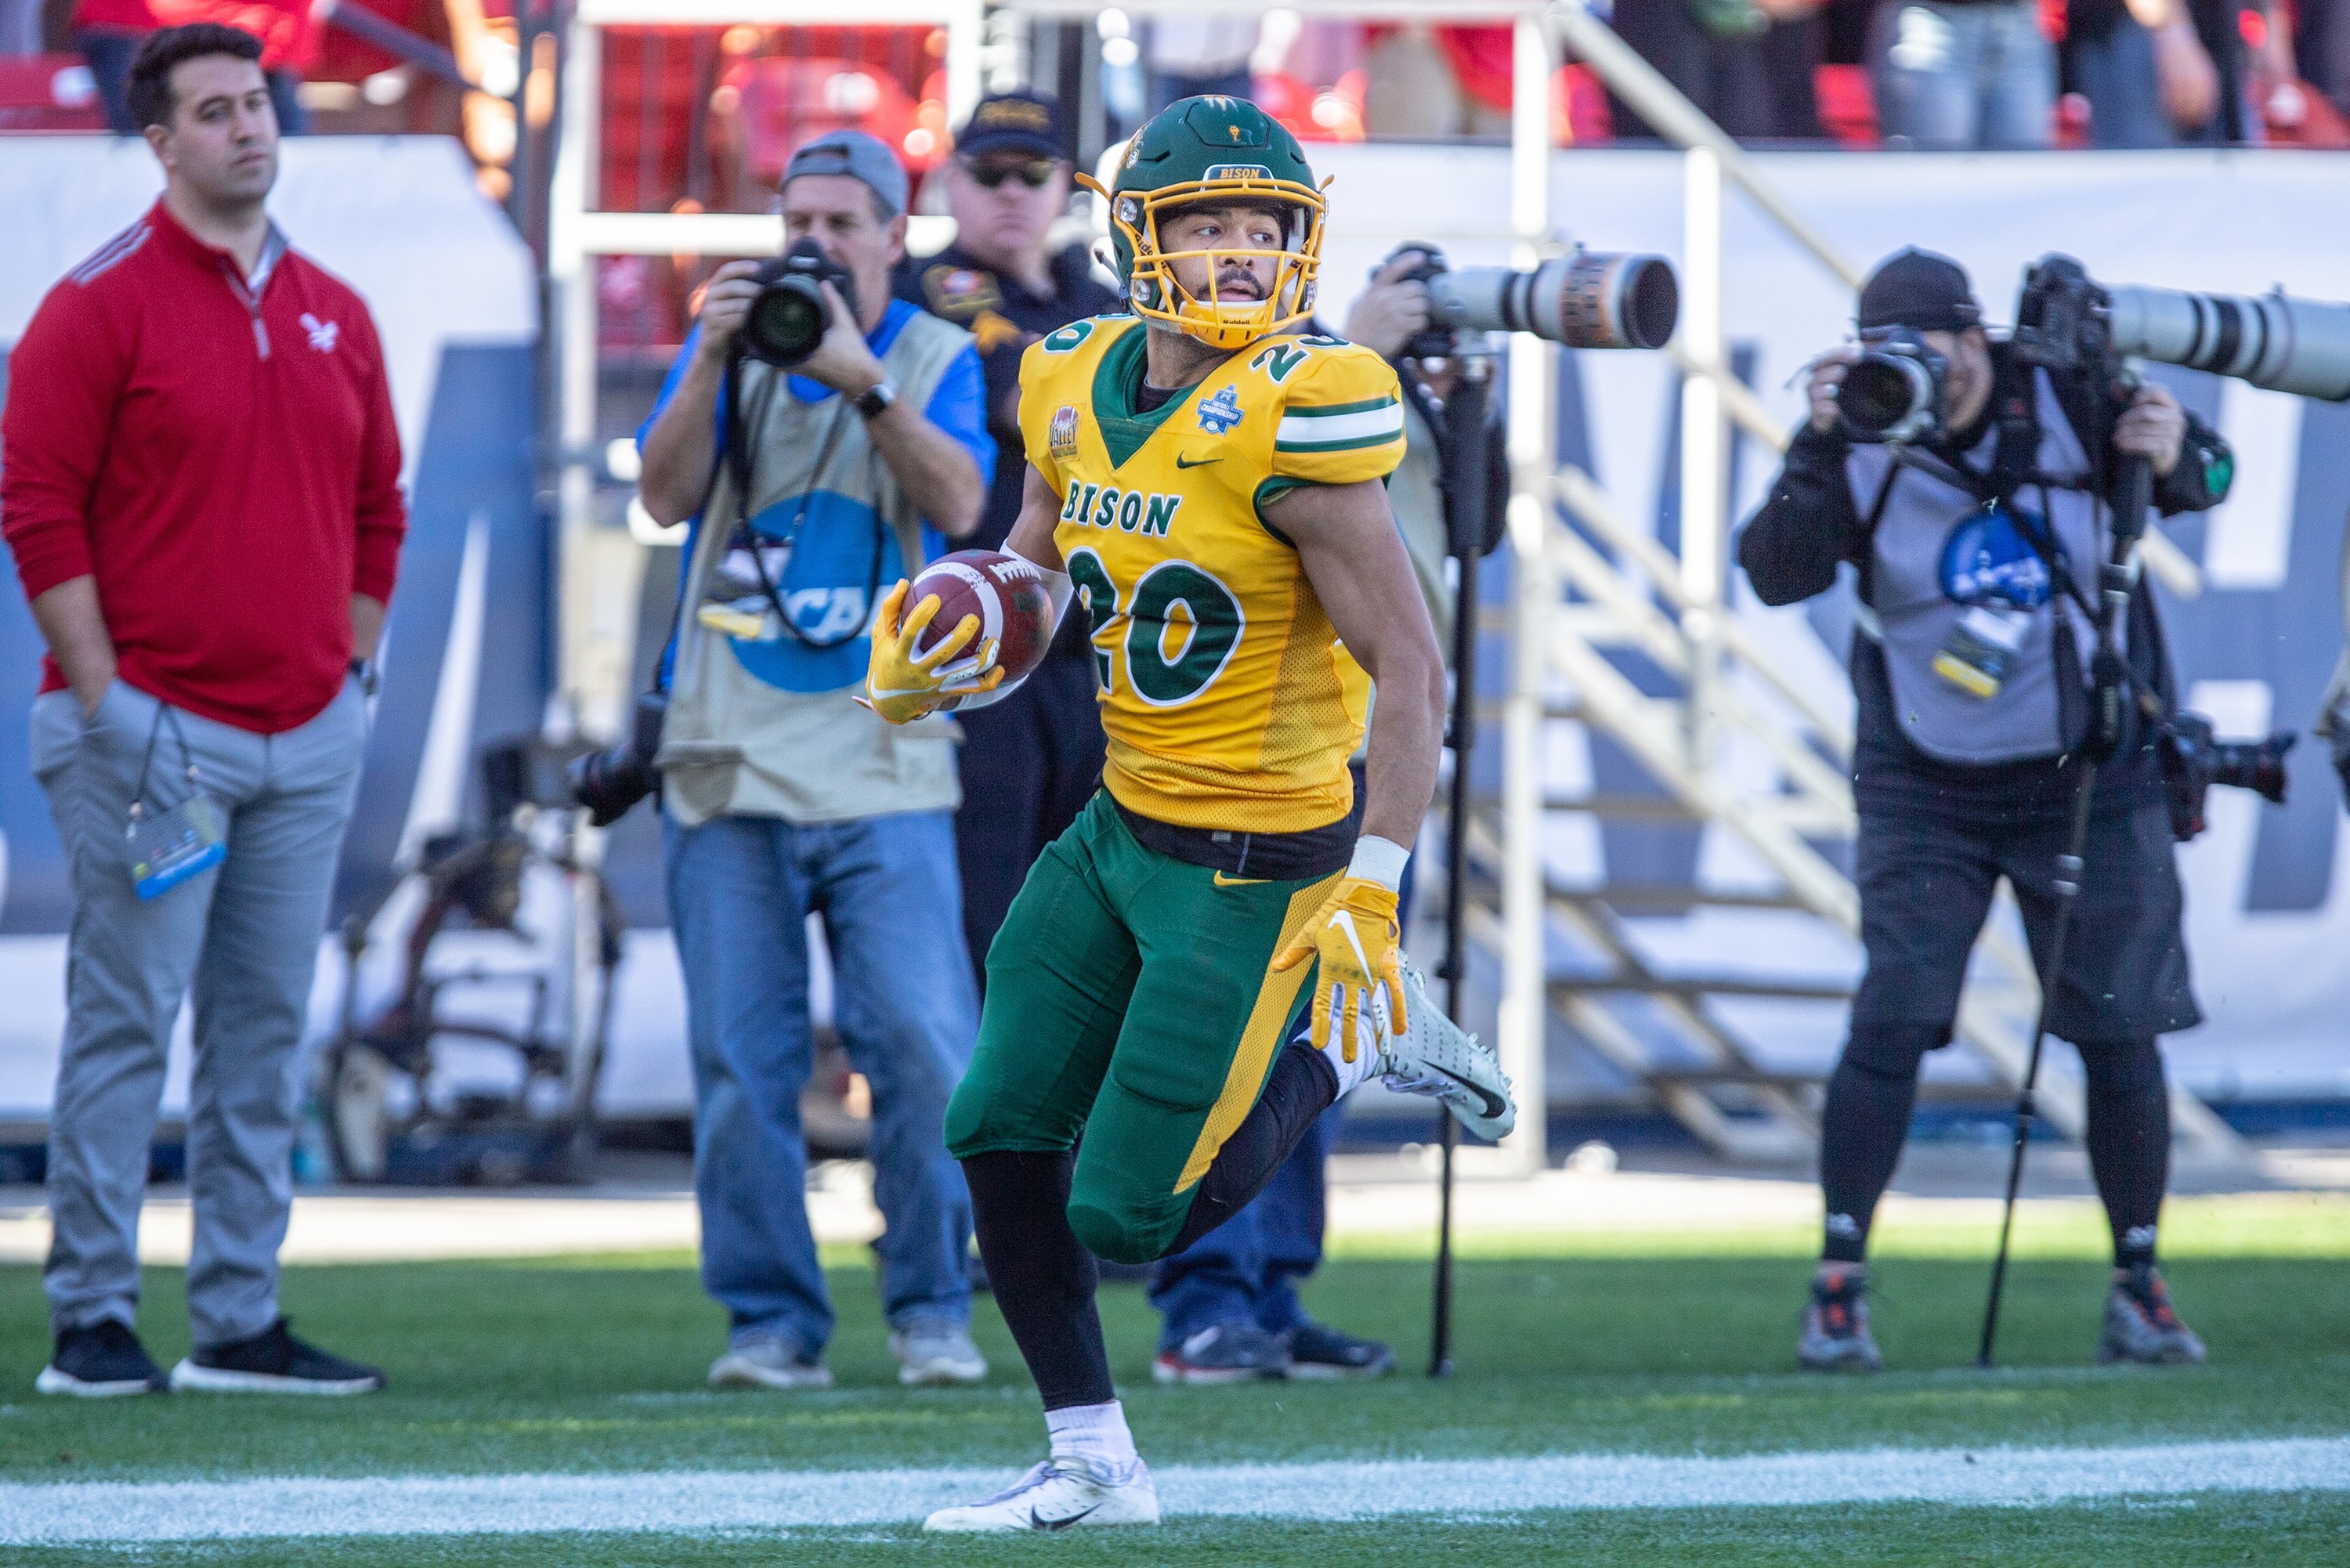 Darrius Shepherd plays for North Dakota State University in the NCAA Division I Football Championship Game in January against Eastern Washington. Photo by Tim Sanger/NDSU Athletics.